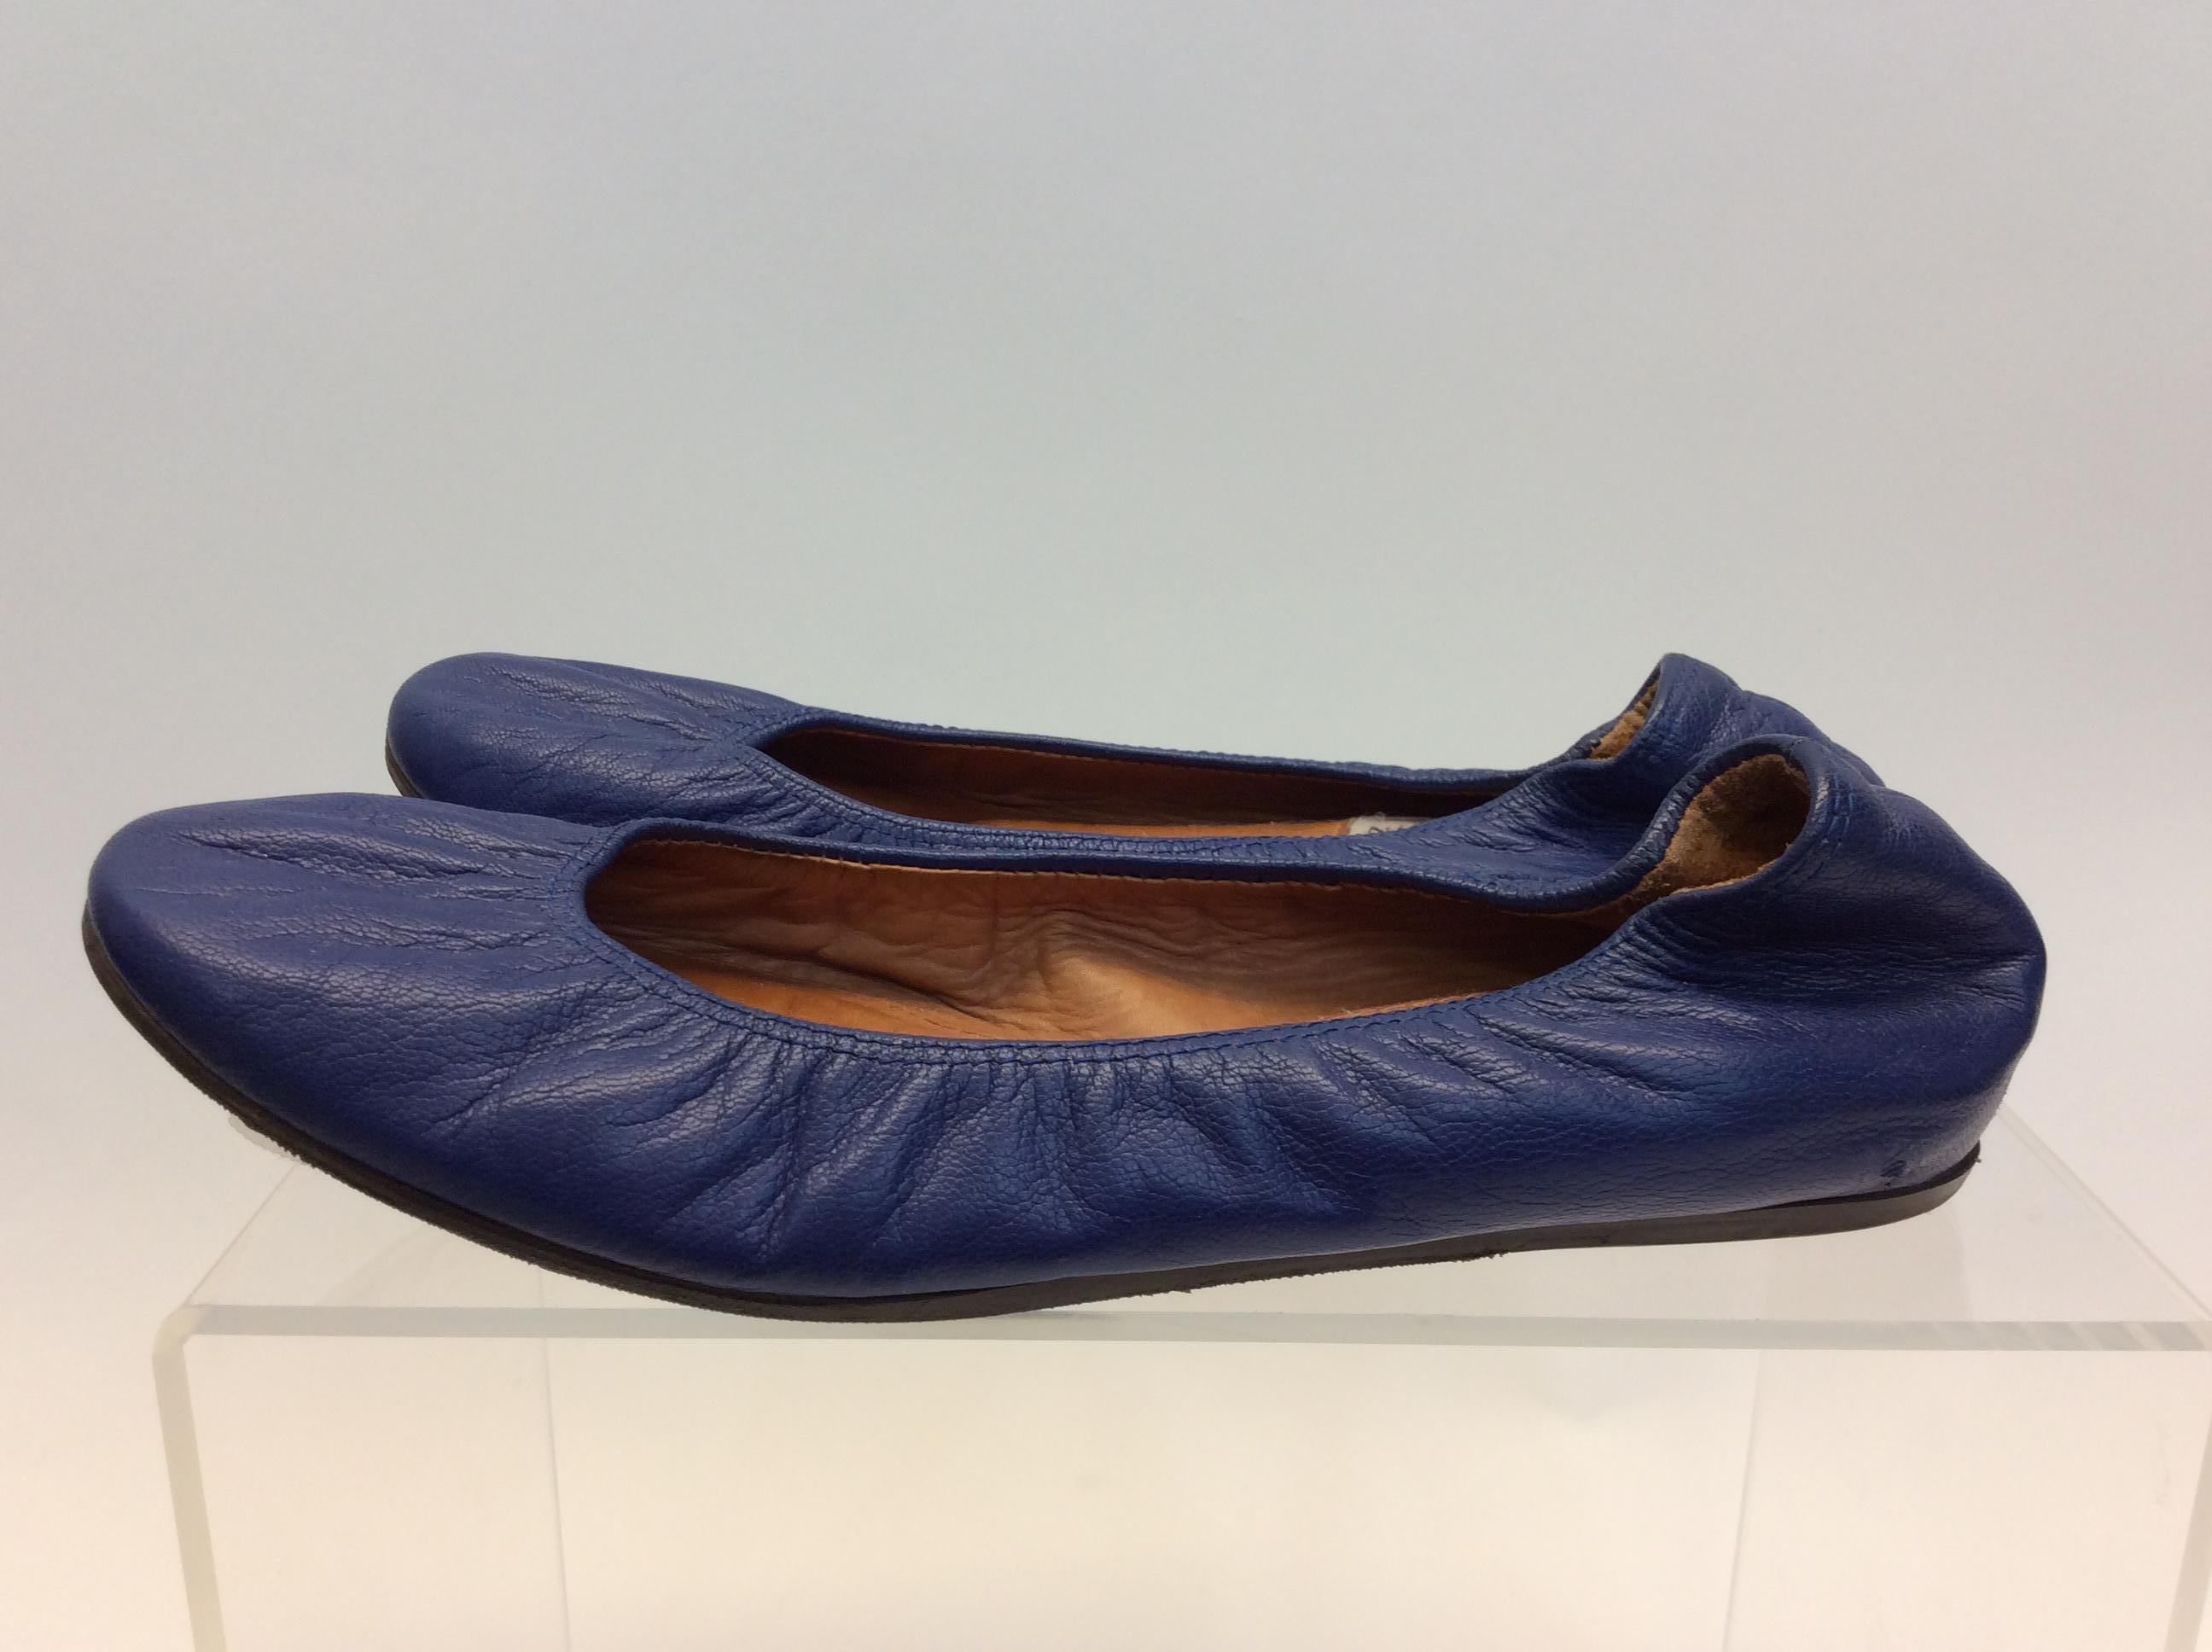 Lanvin Blue Leather Flats
$199
Made in Portugal 
Leather
Size 39